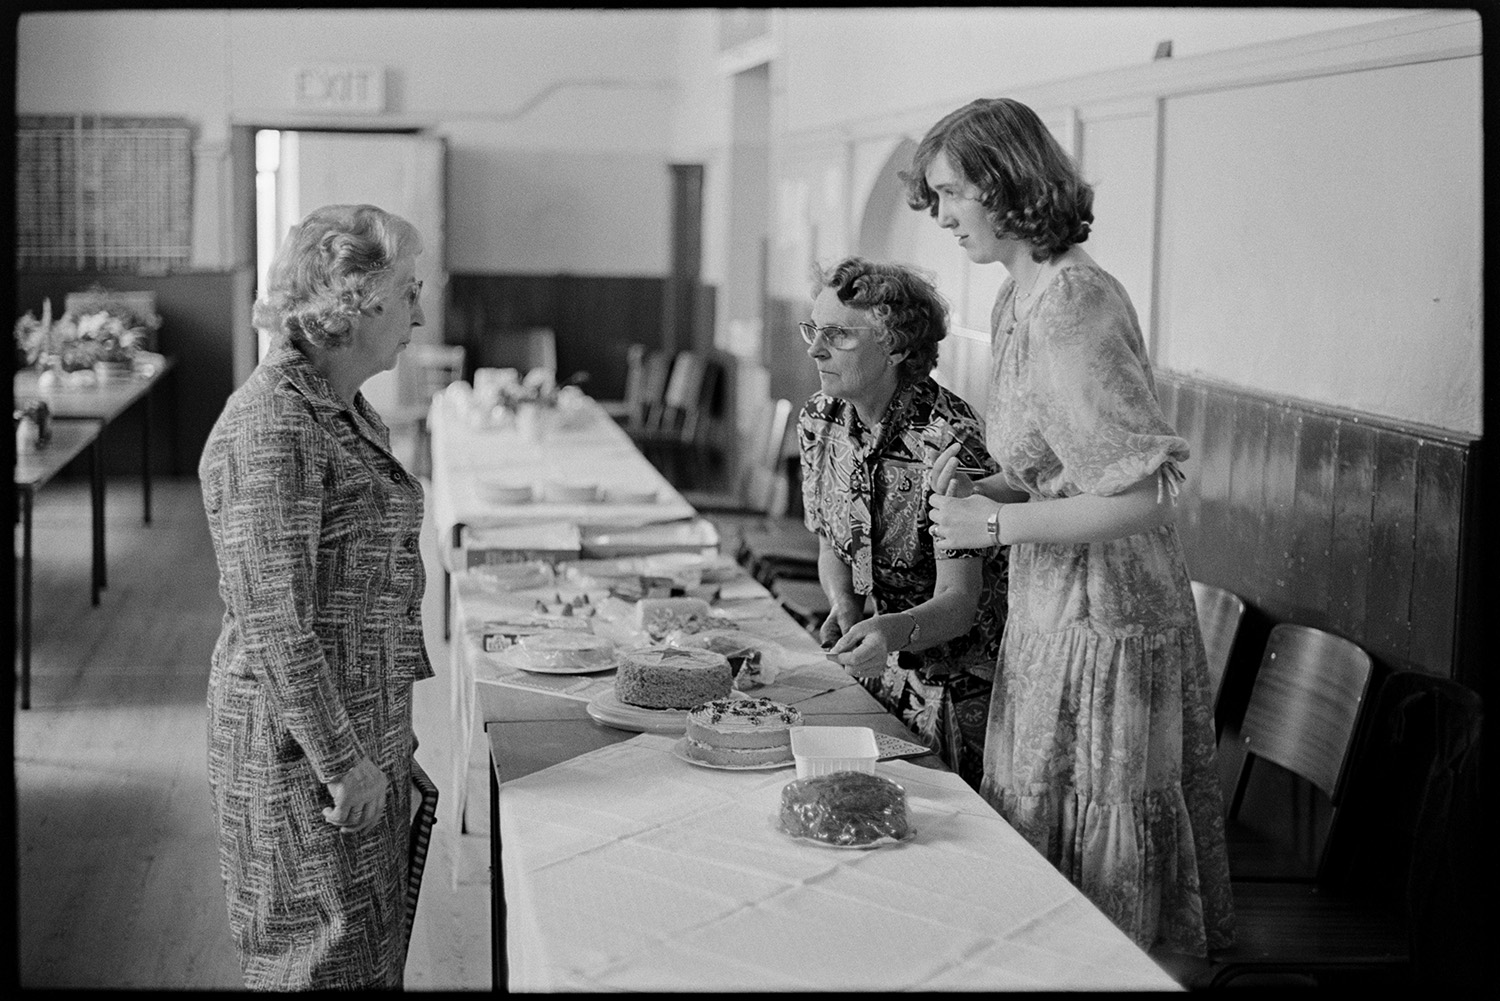 Stalls in village hall, women setting out cakes and produce.
[Three women laying out cakes on tables covered with tablecloths in Roborough Village Hall for Roborough Fair.]